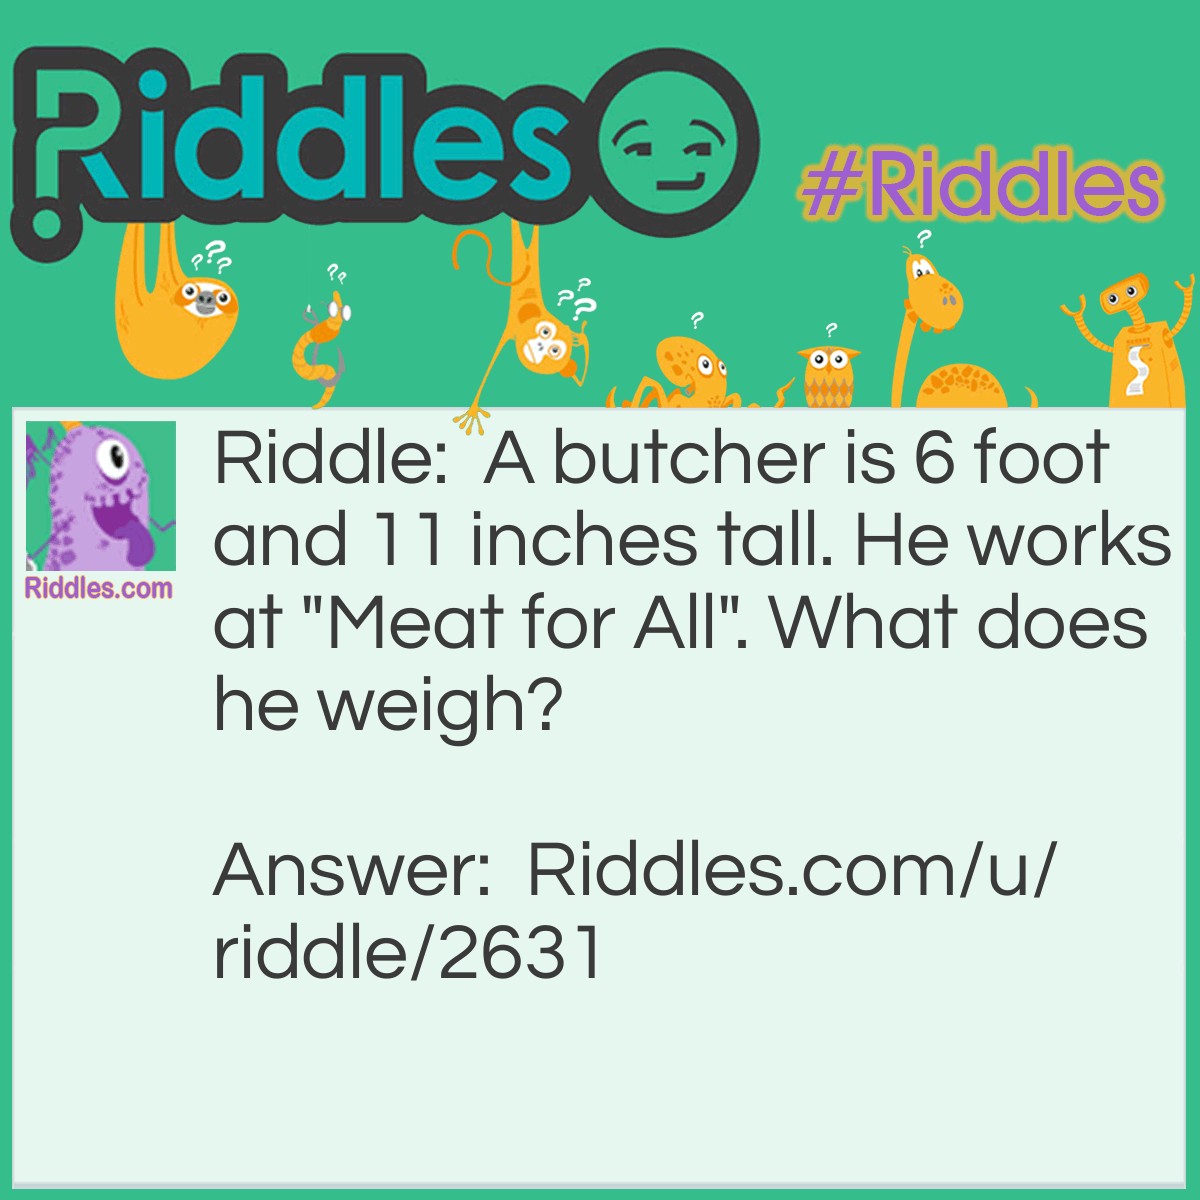 Riddle: A butcher is 6 foot and 11 inches tall. He works at "Meat for All". What does he weigh? Answer: He weighs meat.